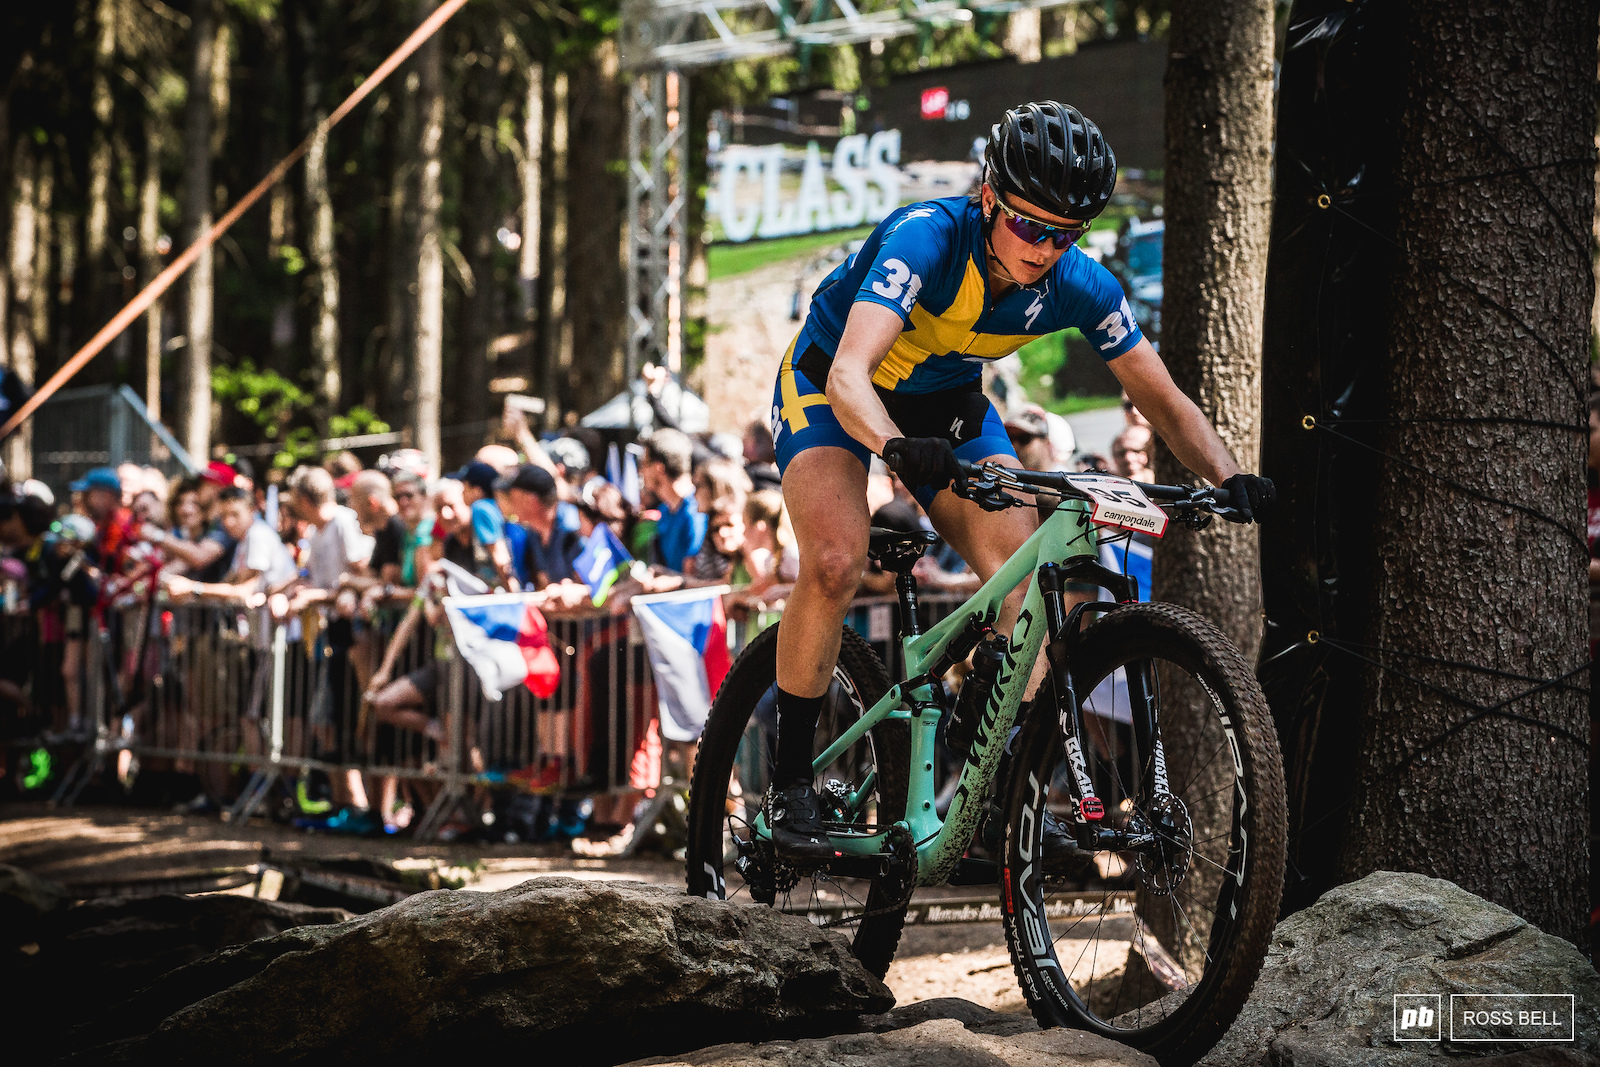 It's good to see Jenny Rissveds back in action at the World Cups. 33rd on the day for the Swede.